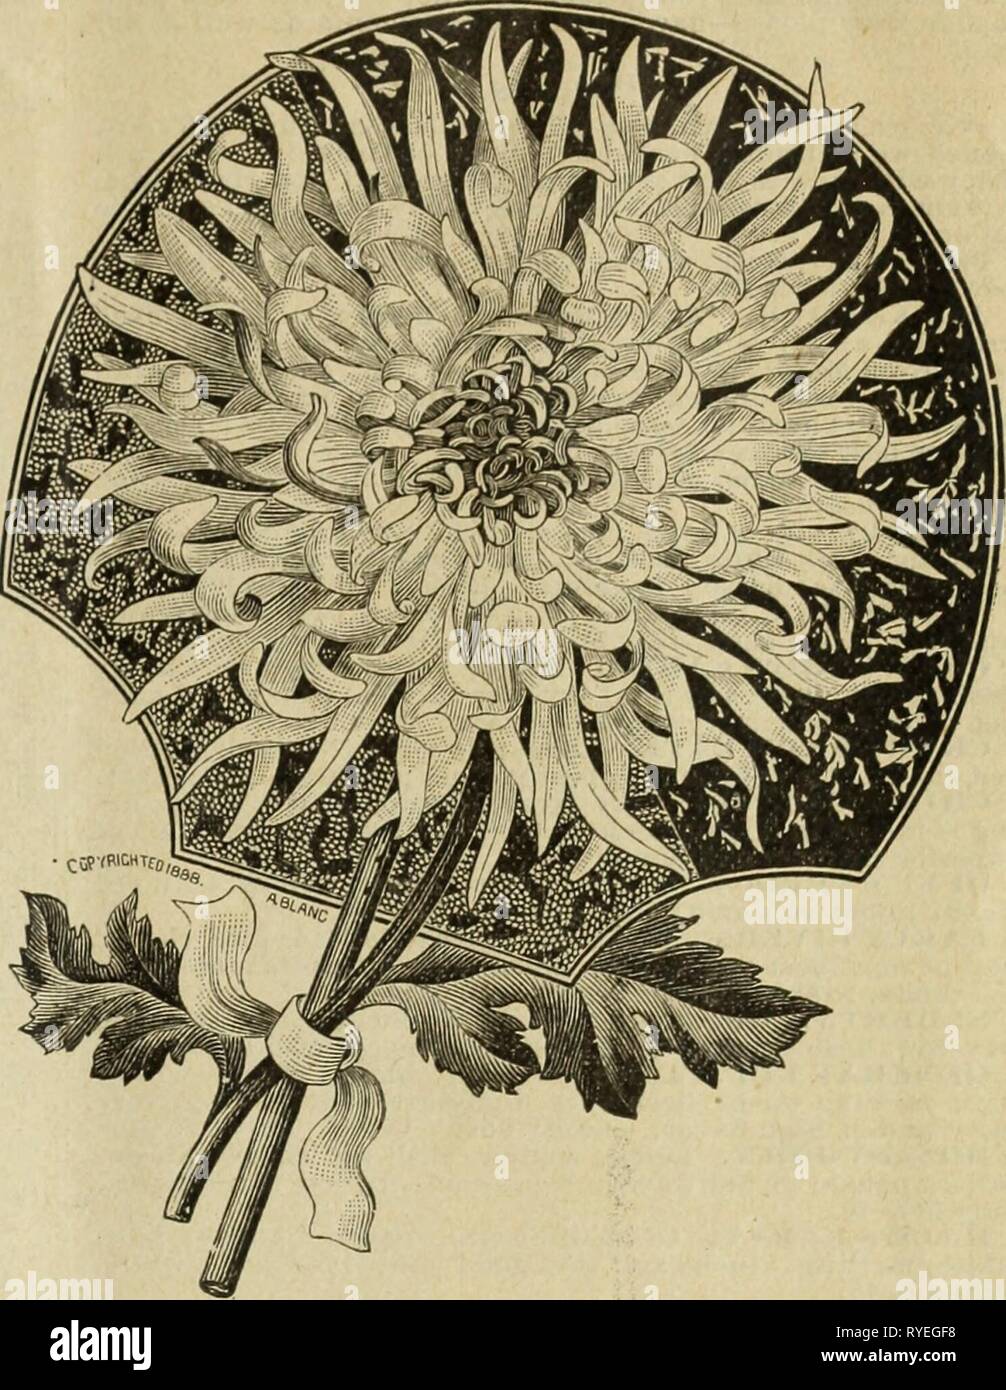 Drumm Seed and Floral Co. : Fall, 1894-5  drummseedfloralc1895drum Year: 1895  Drumm Seed and Floral Co. 13 CHRYSANTHEMUMS—Continued. pronounced by all to be next, if not equal to the rose. Their blooming season is near at hand, and those of our customers who have not got a good selection will do well to glance over this list of varieties, which are all choice, no common ones amongst them. All are in from six to eight inch pots, nicely set with bud and blooming. Price, except when noted, from 25c, 50c. and 75c. each. Well packed. Purchaser to pay express charges. We merely name the varieties.  Stock Photo